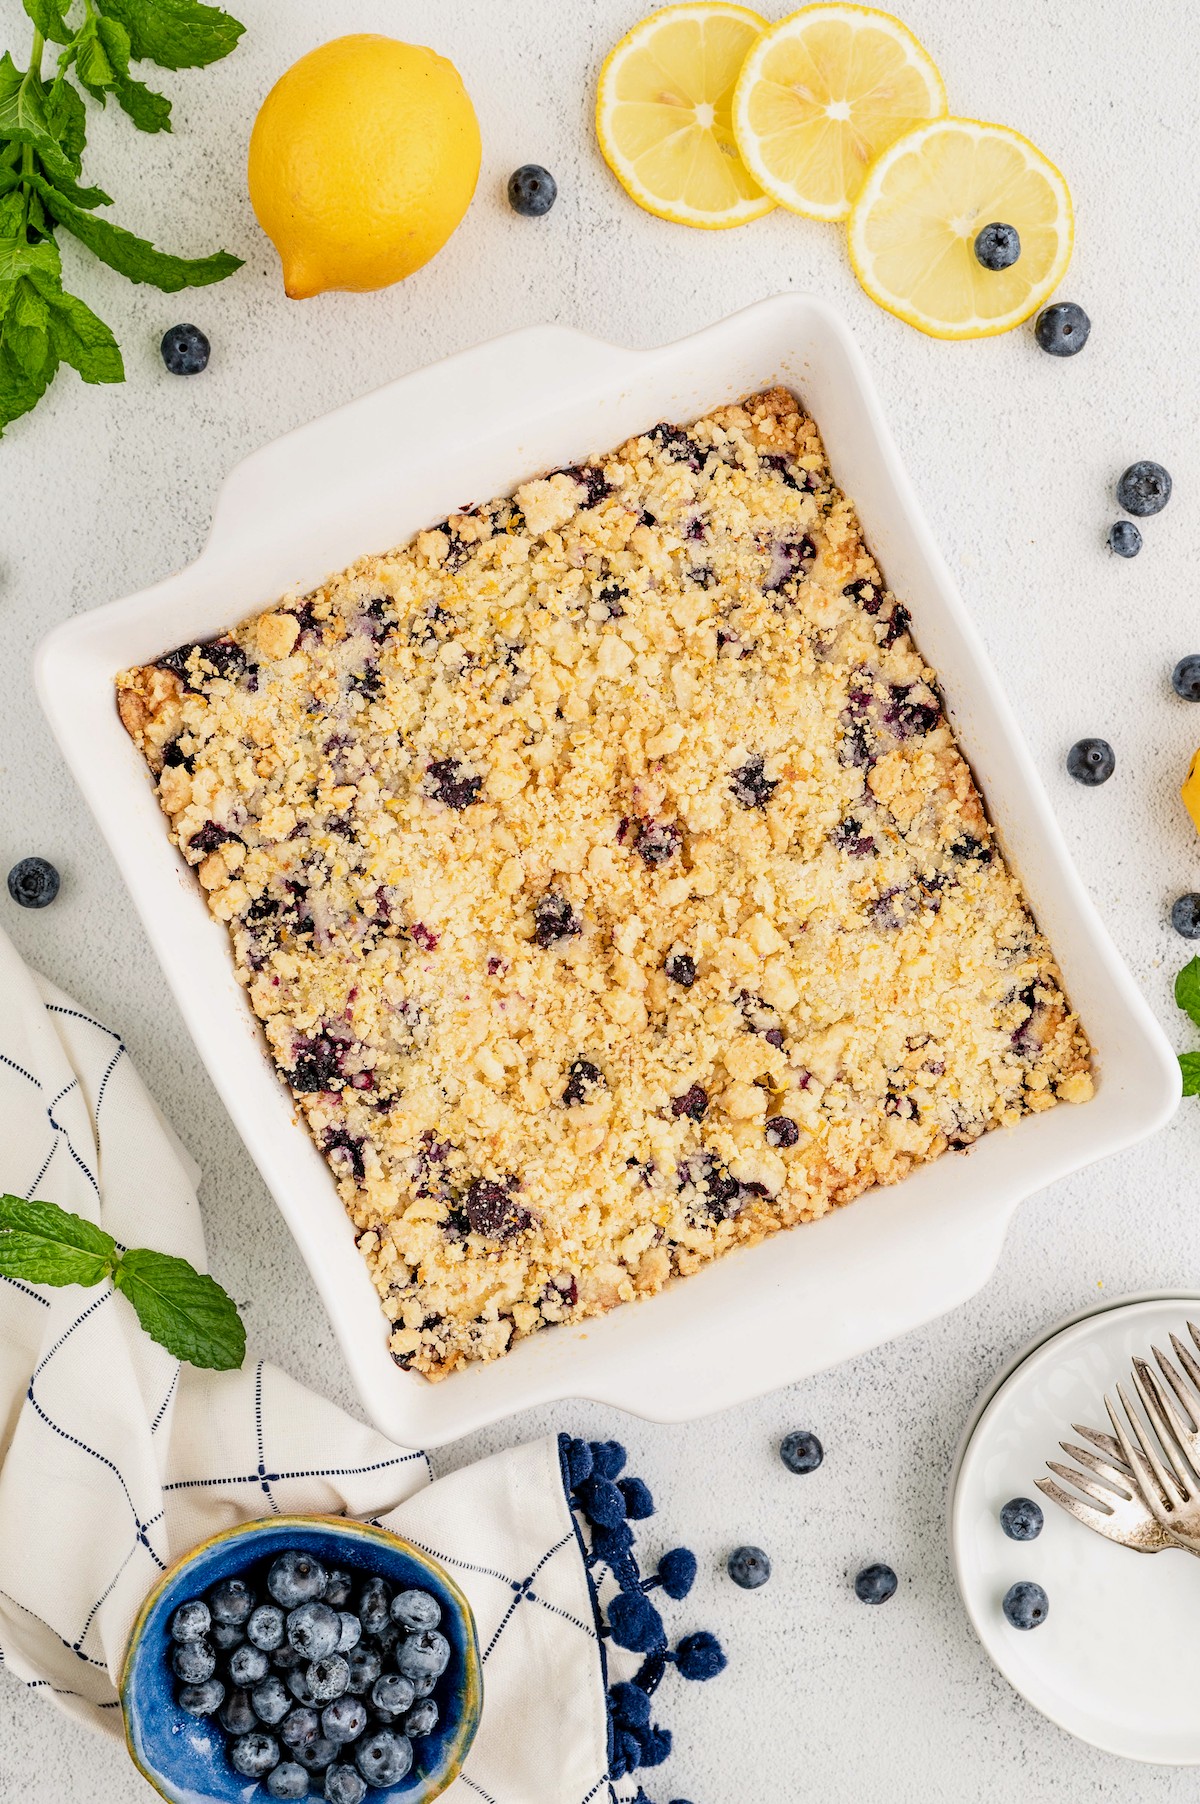 Overhead view of a pan of lemon blueberry buckle